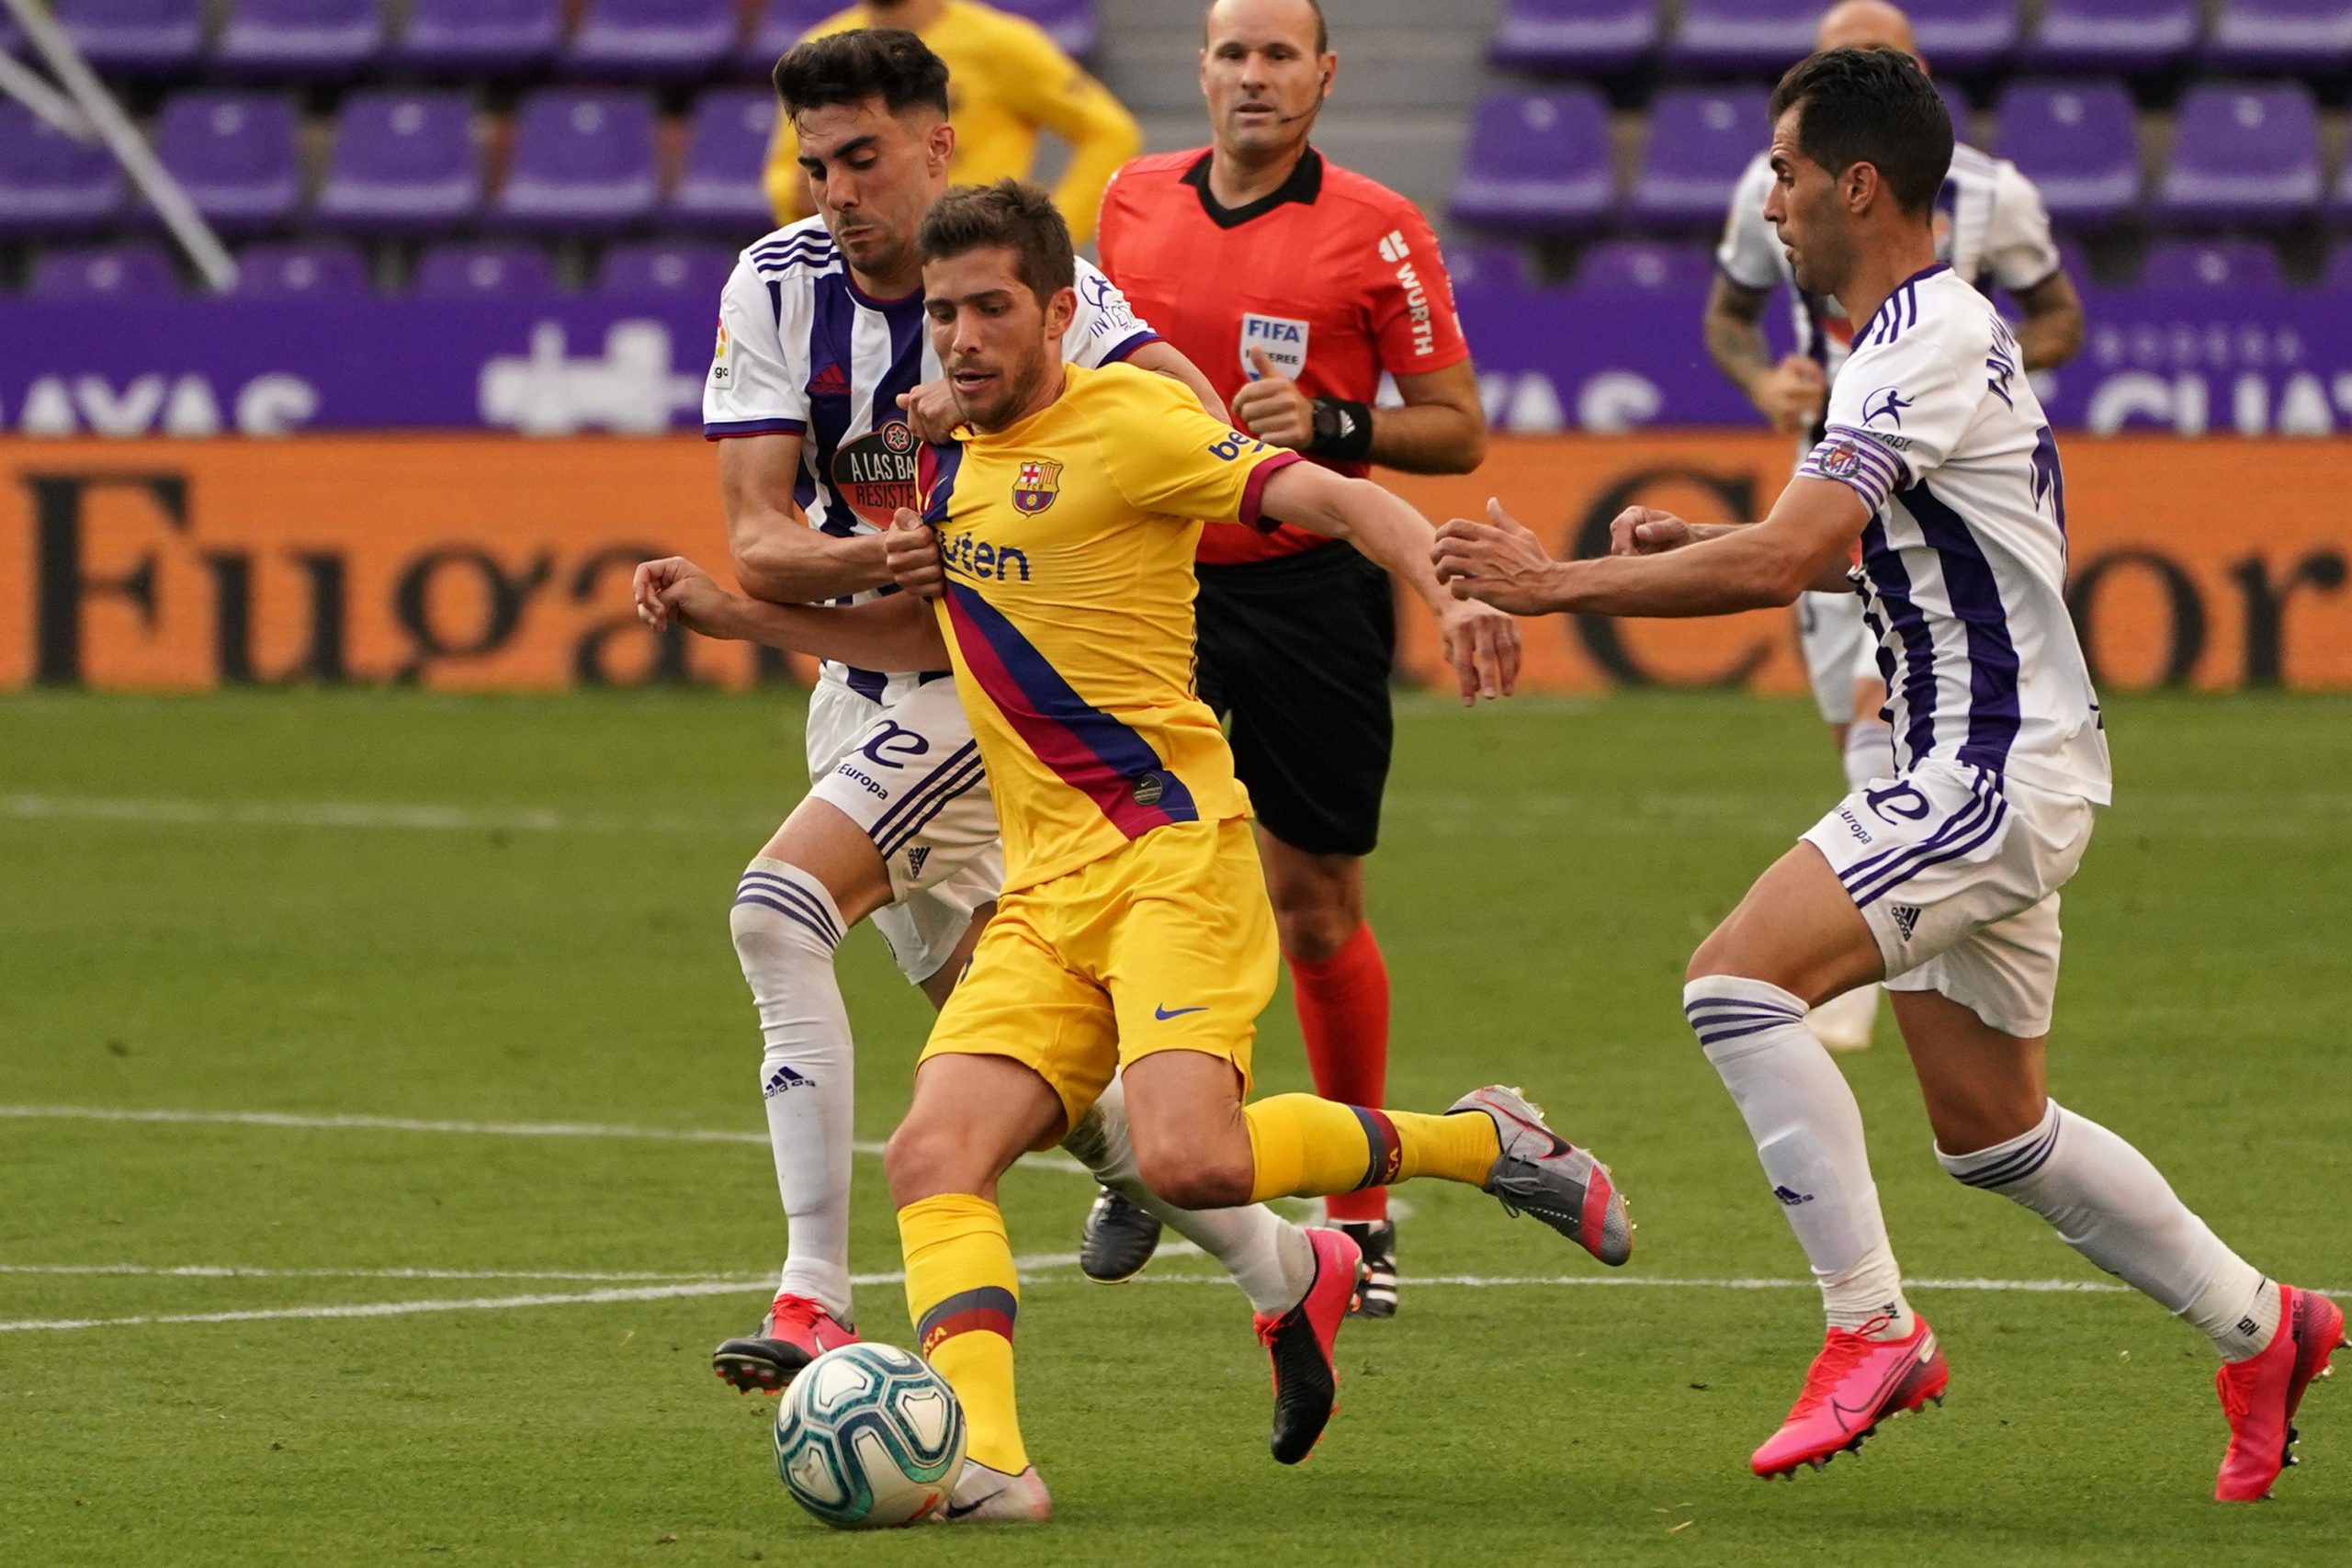 Manchester City in pole position to land Sergi Roberto who is seen in the photo